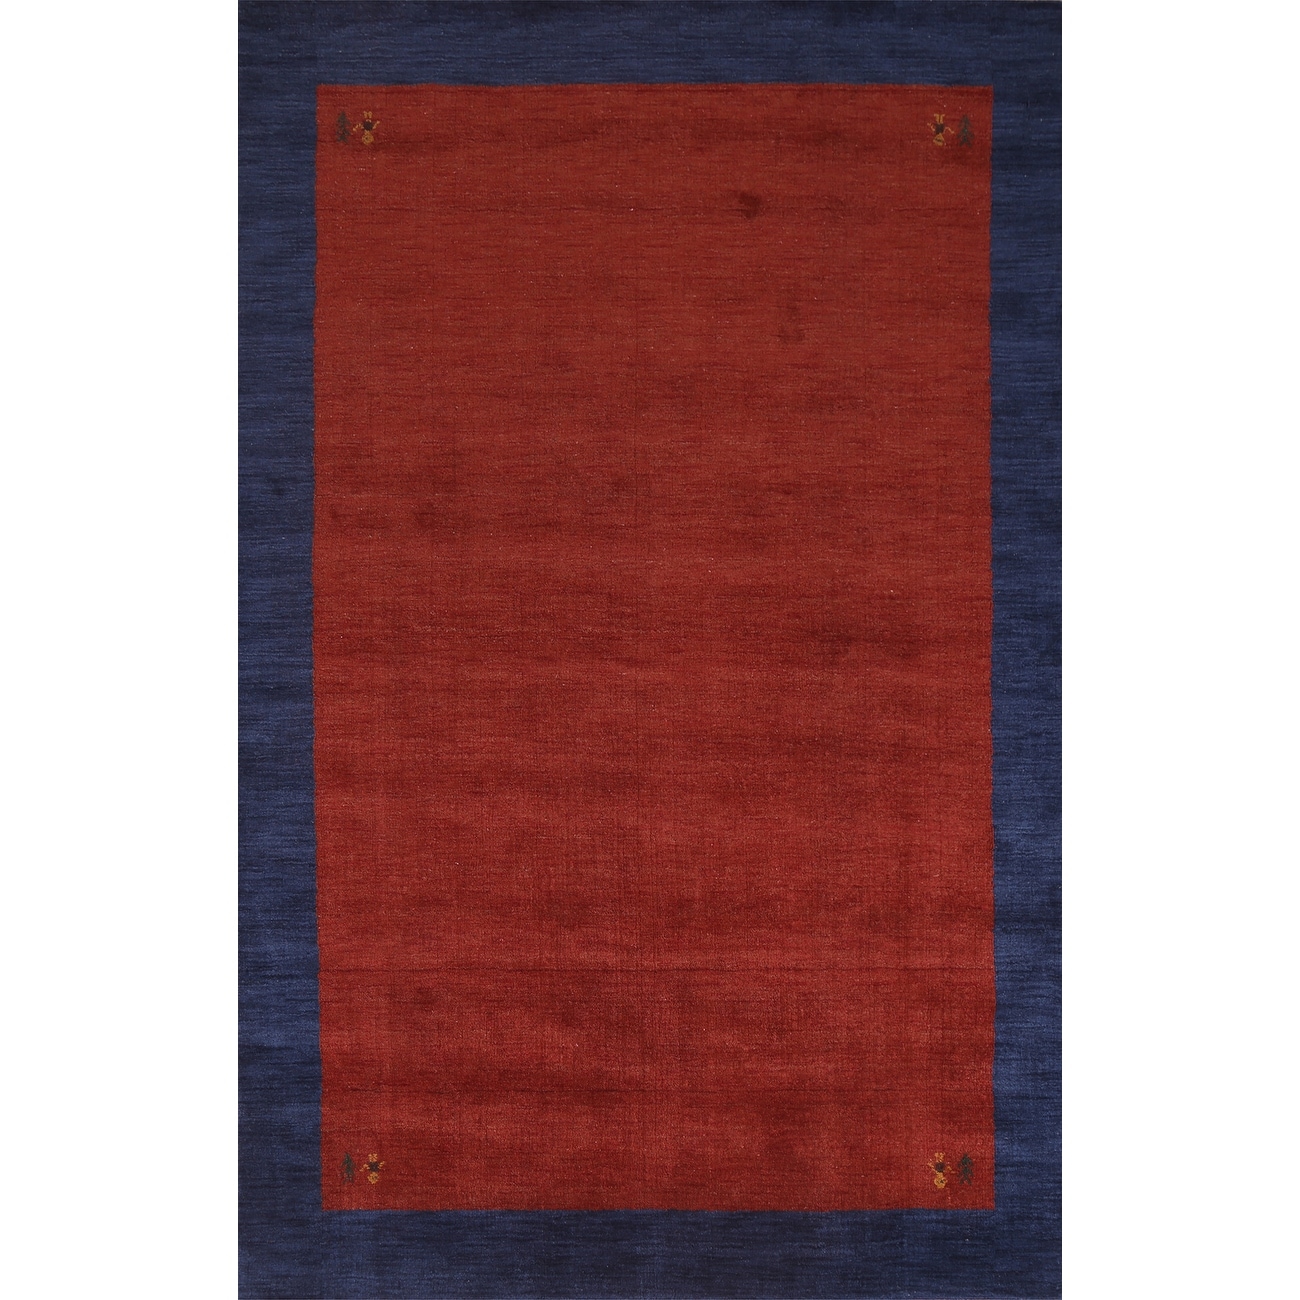 Rugsotic Carpets Hand Knotted Gabbeh Silk Mix 6'x9' Area Rug Contemporary Light Red White LSM634